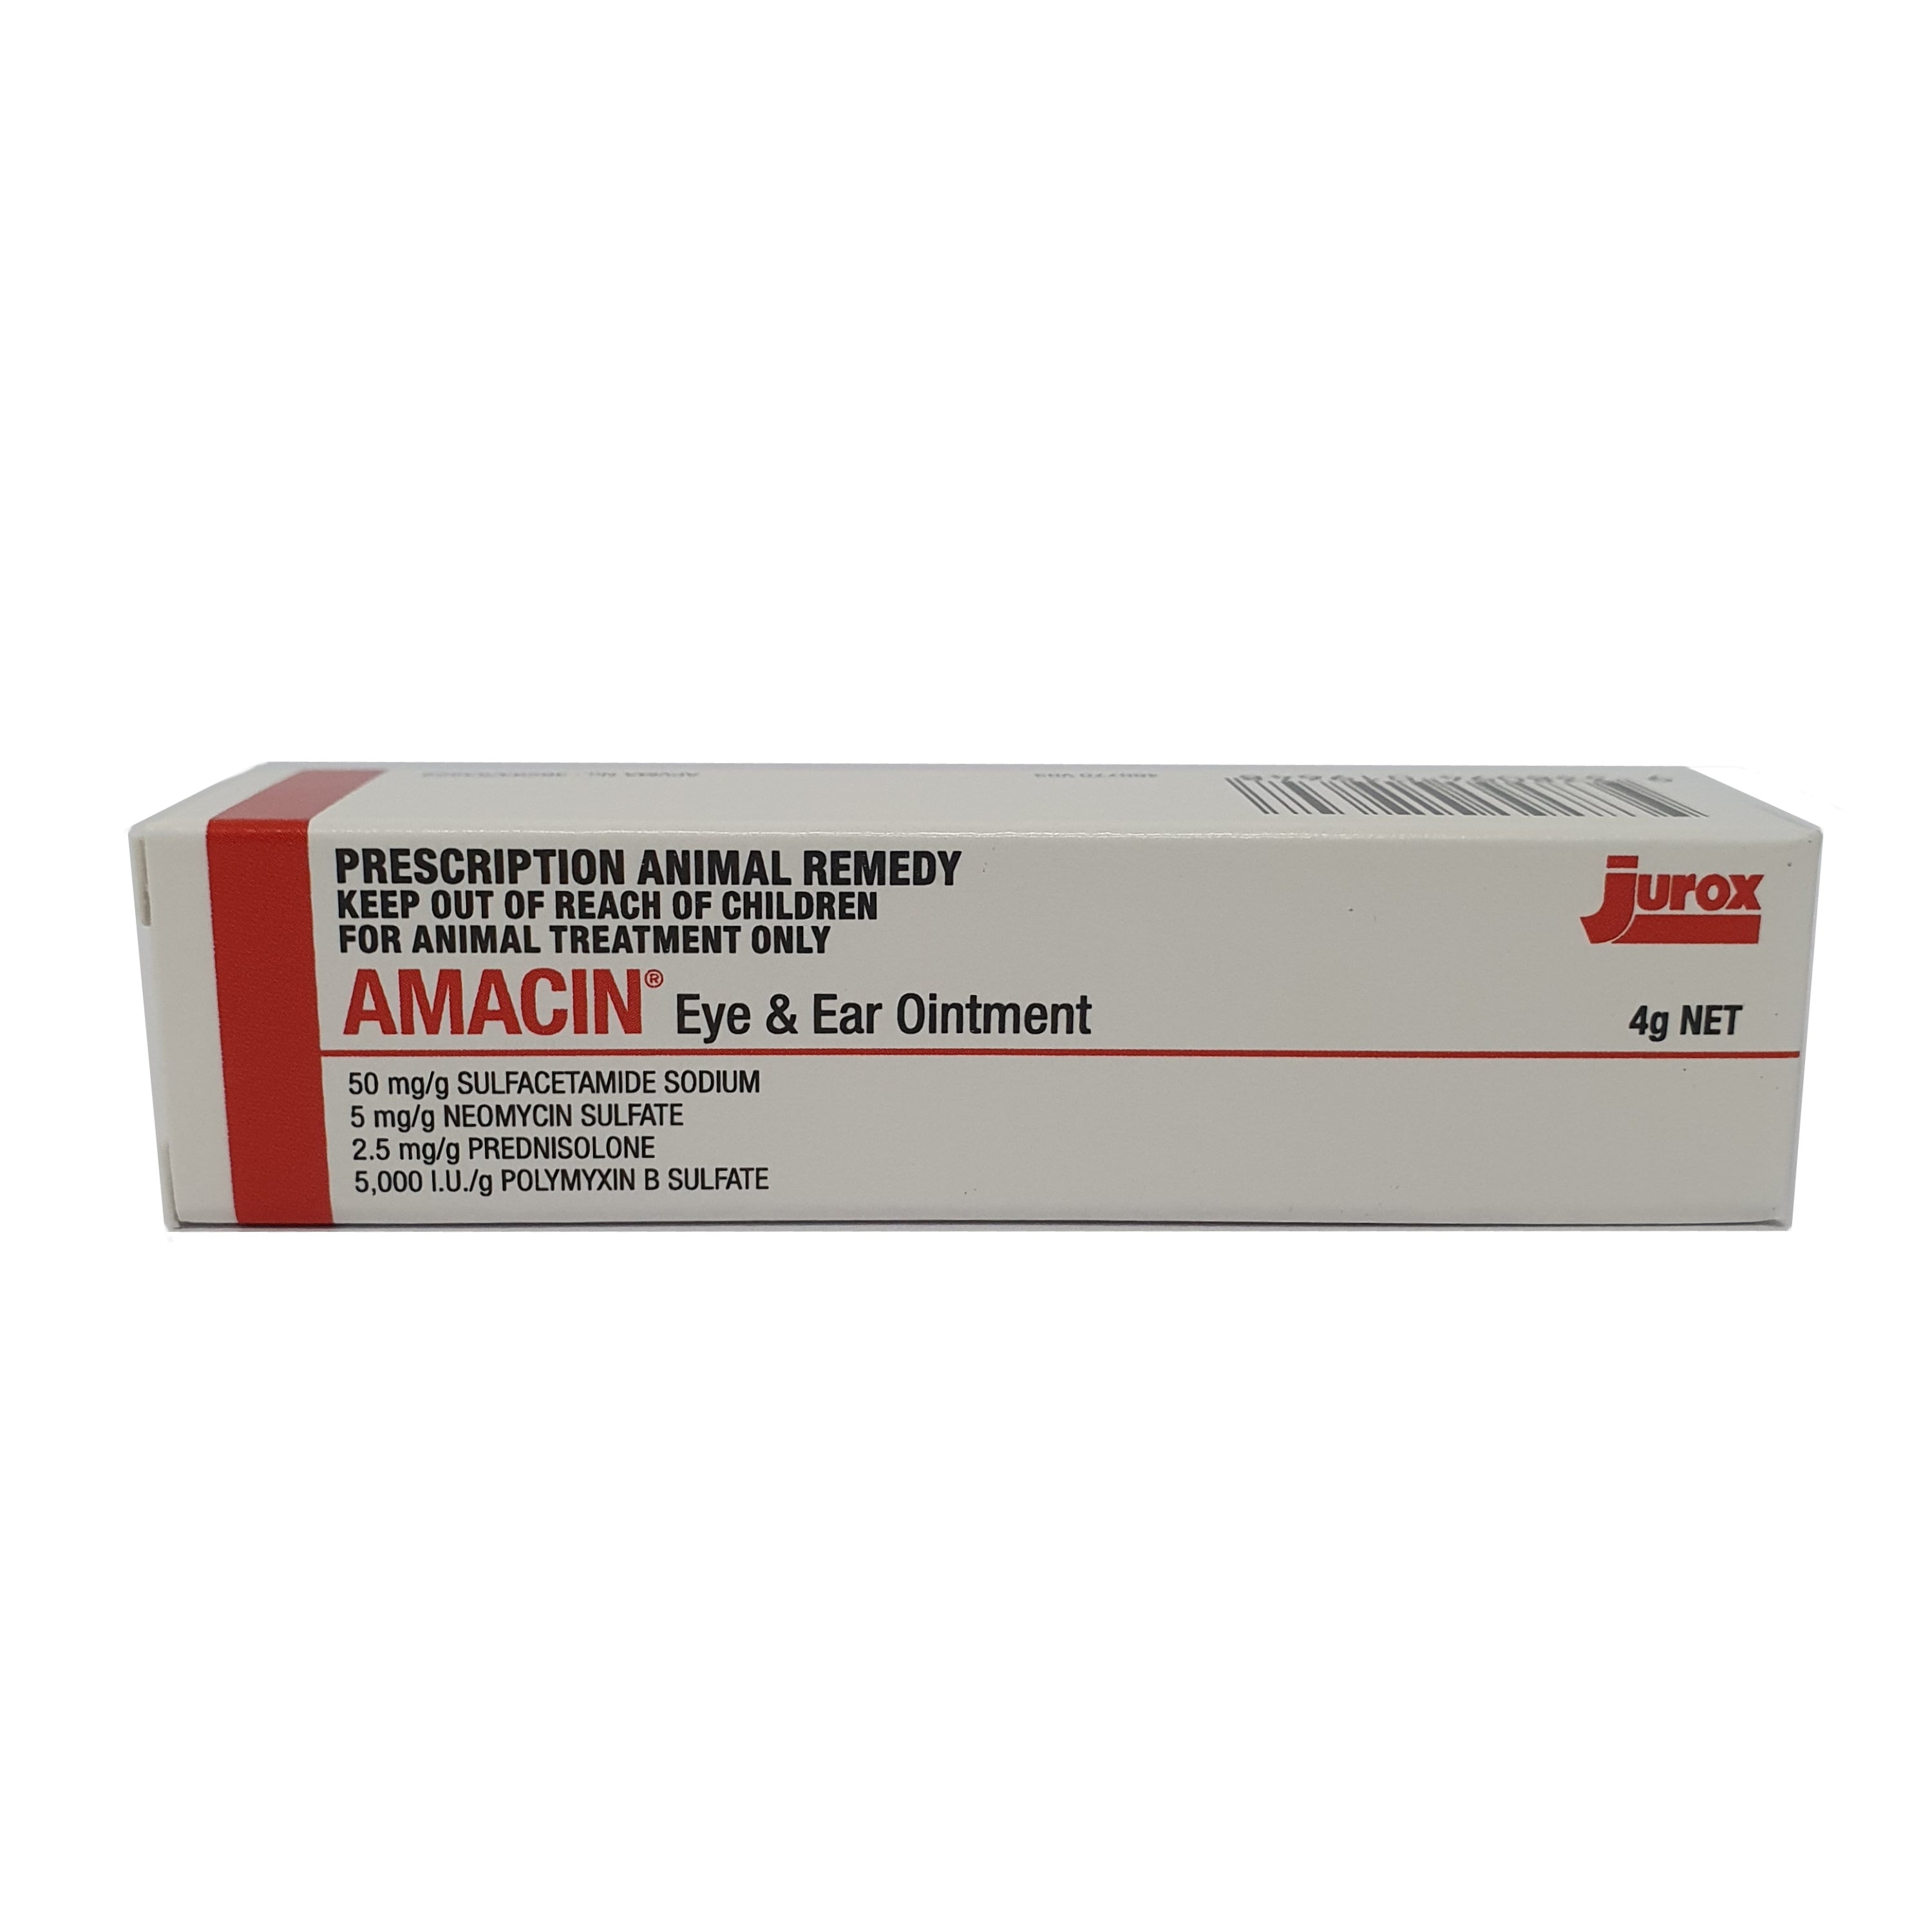 Jurox Amacin Antibiotics Eye and Ear Ointment for Dogs Cats Pets